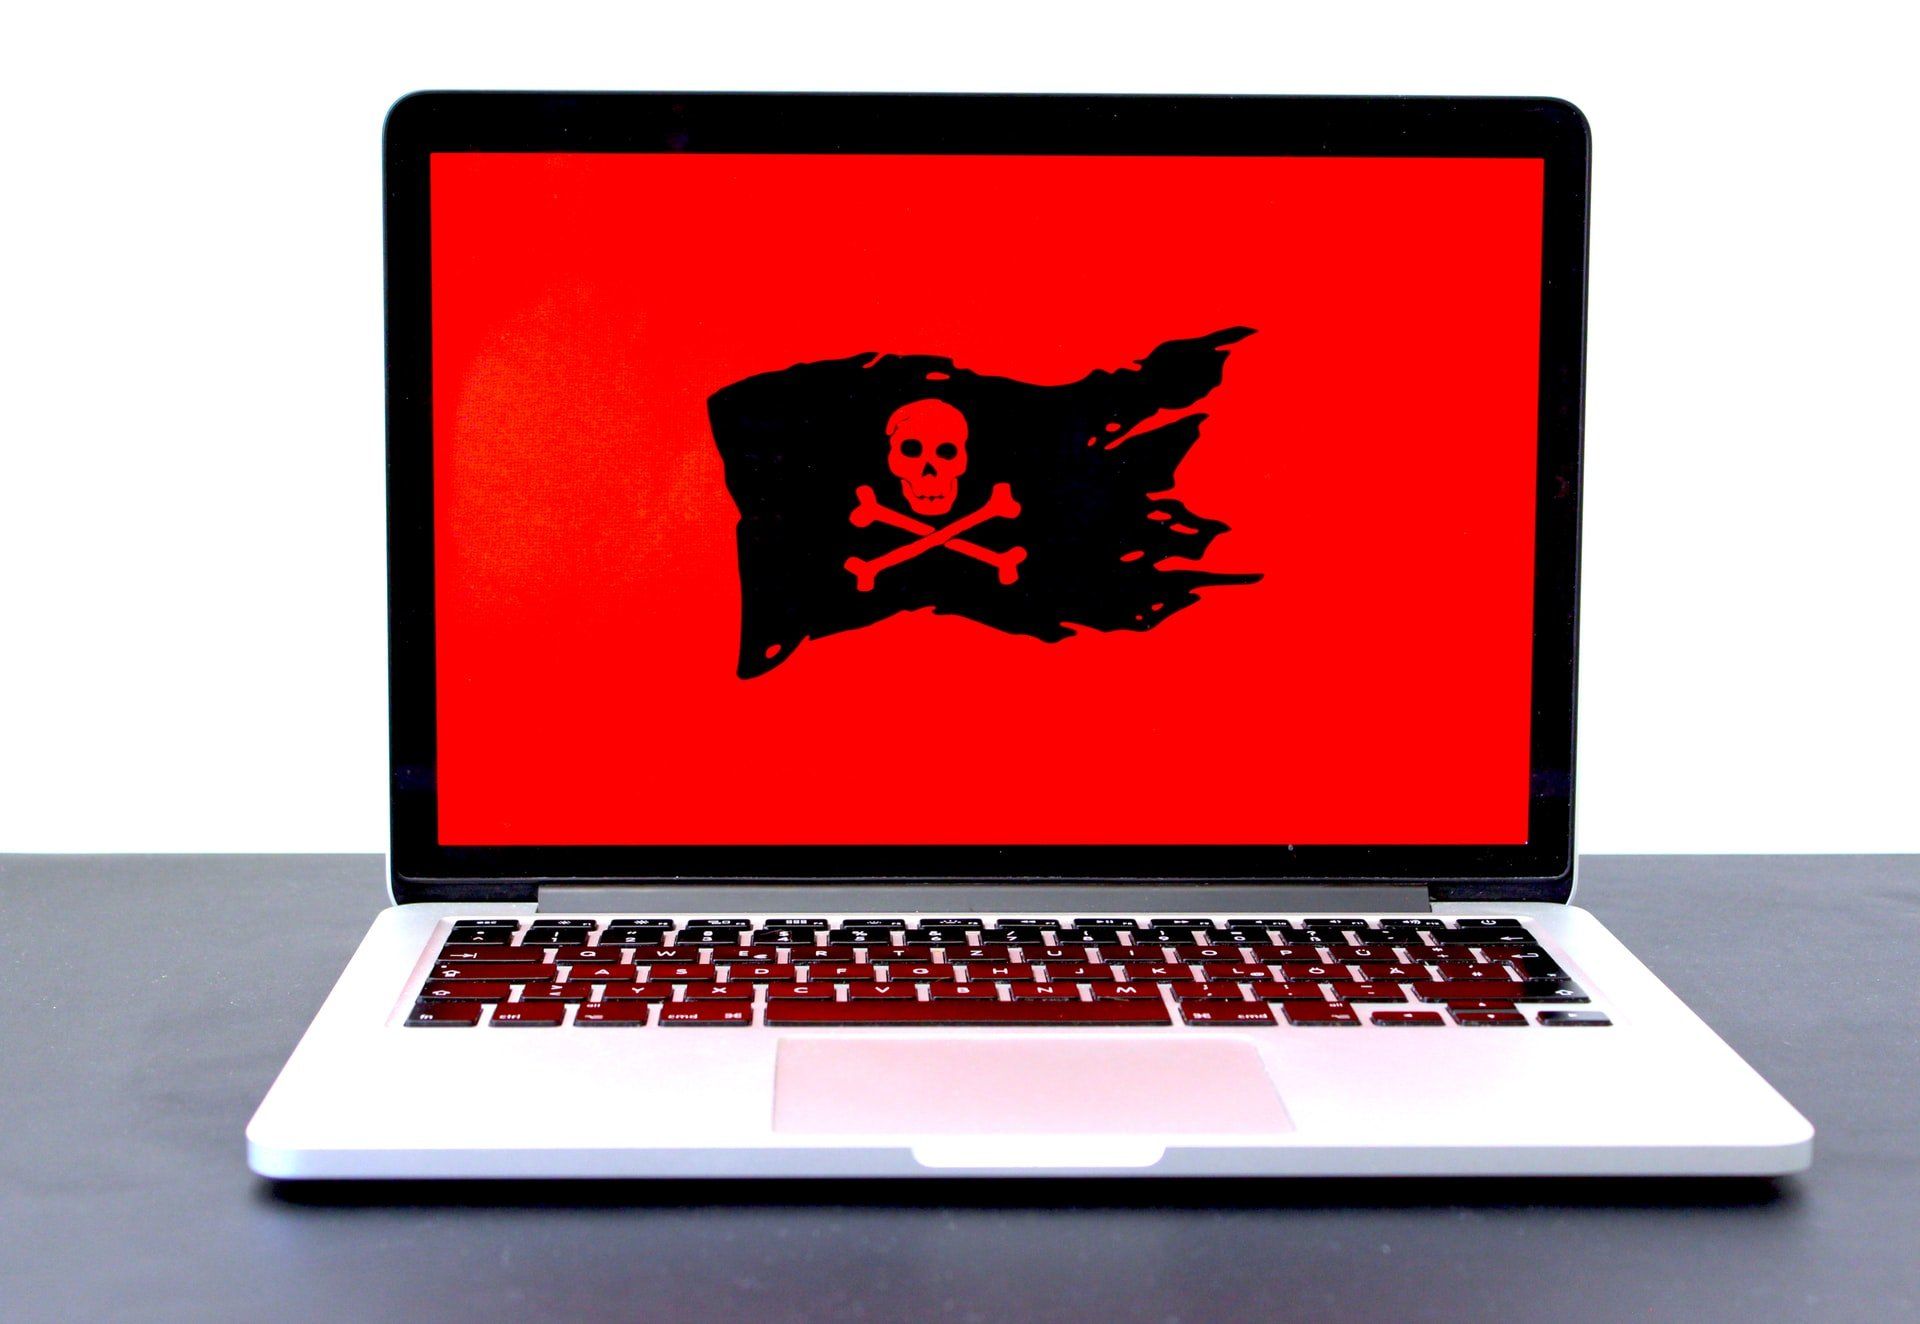 Image of a laptop with a skull and crossbones flag signifying danger